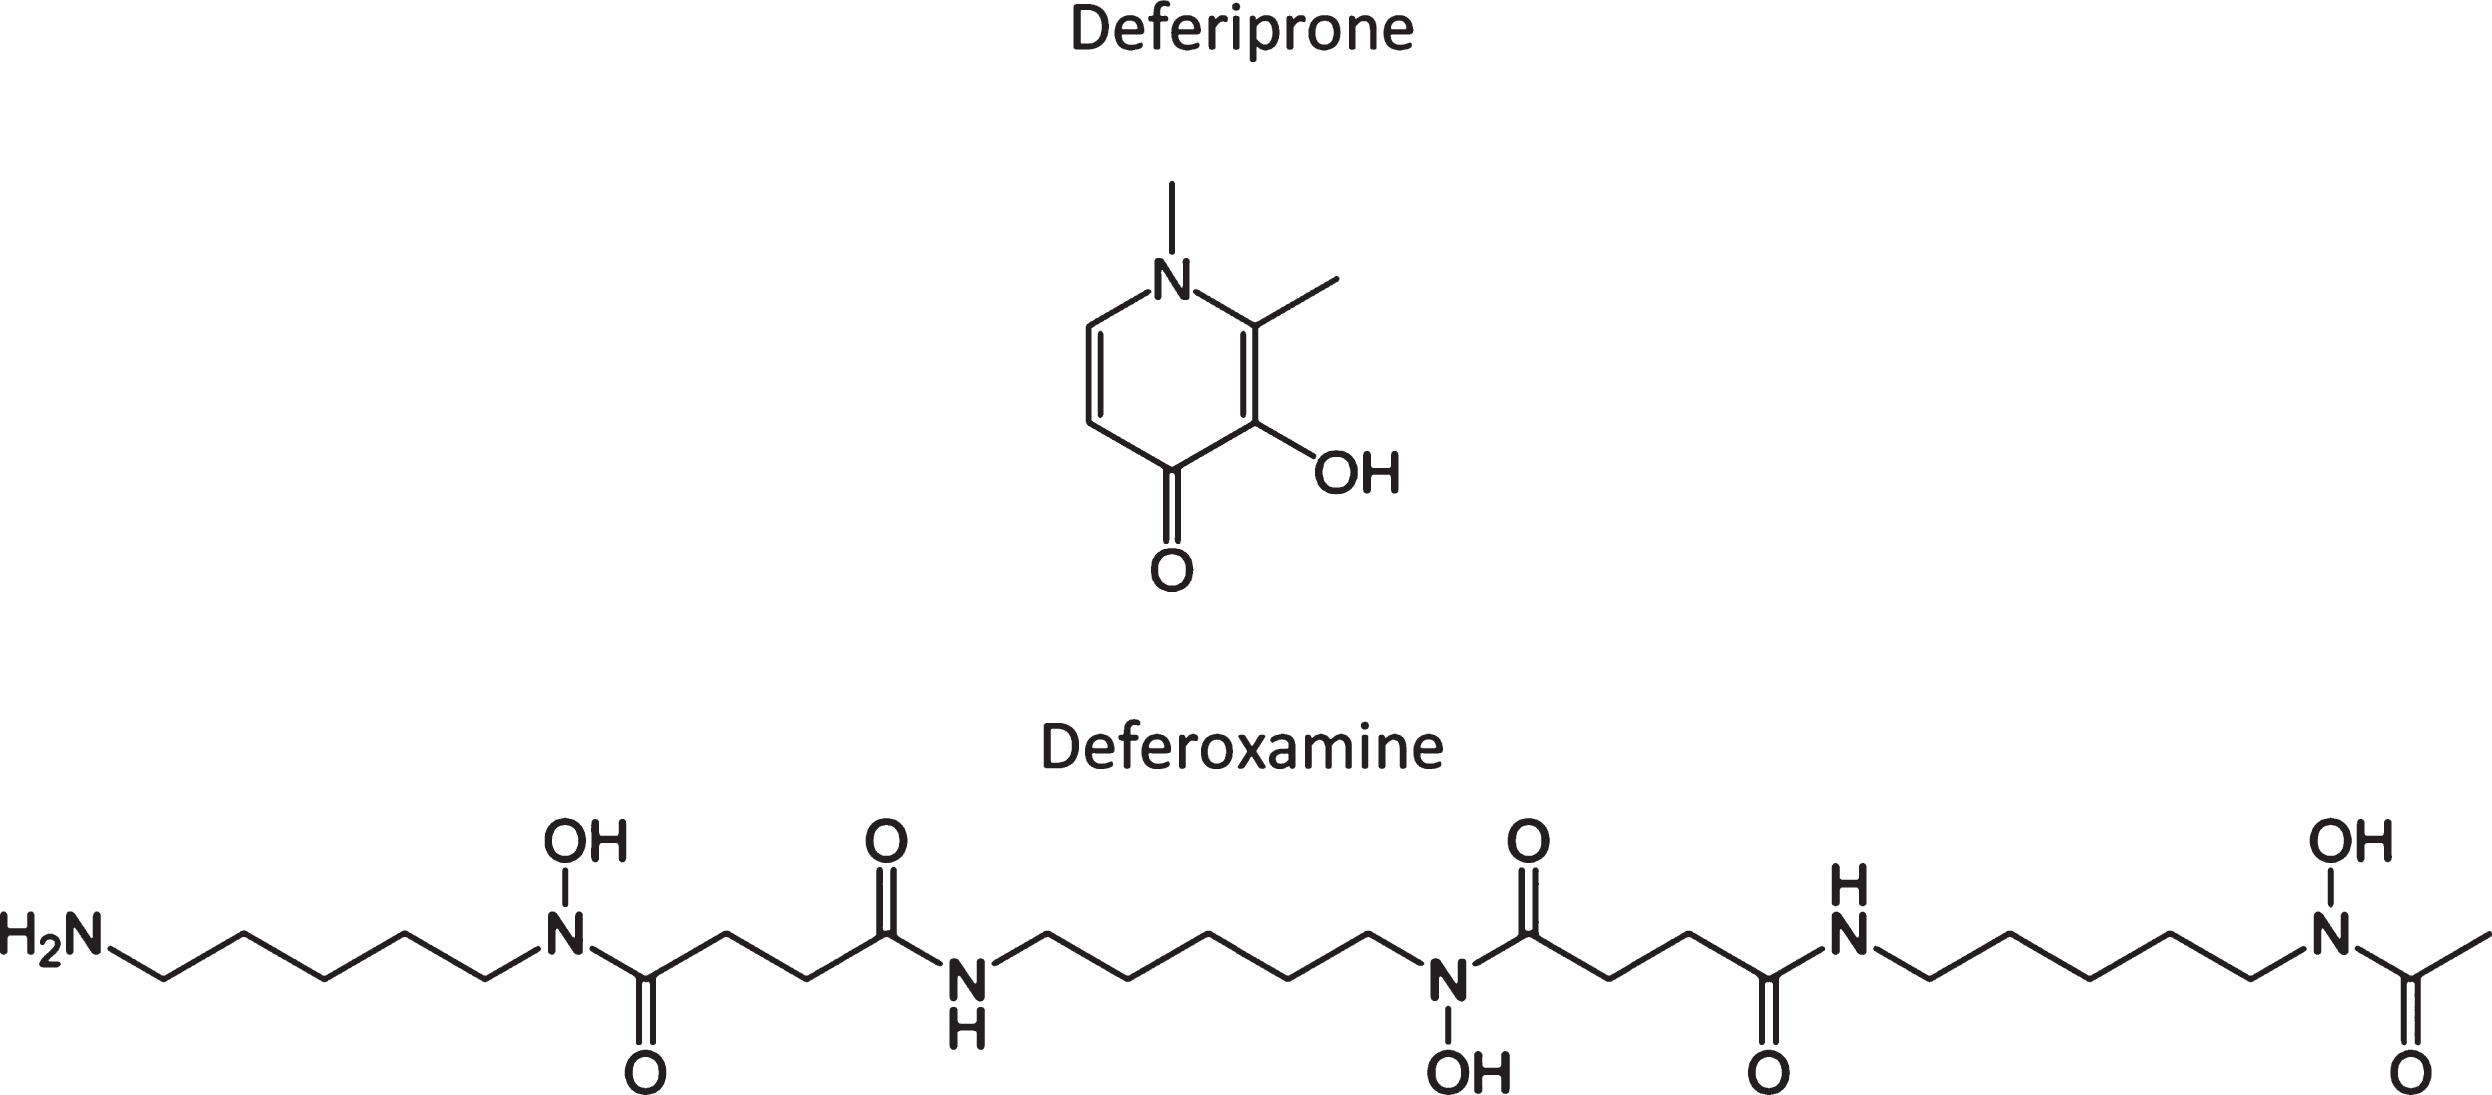 Chemical structure of two iron chelators, deferiprone and deferoxamine (also known as desferrioxamine), highlighting the large structural differences in many of these compounds that chelate or modulate metals.